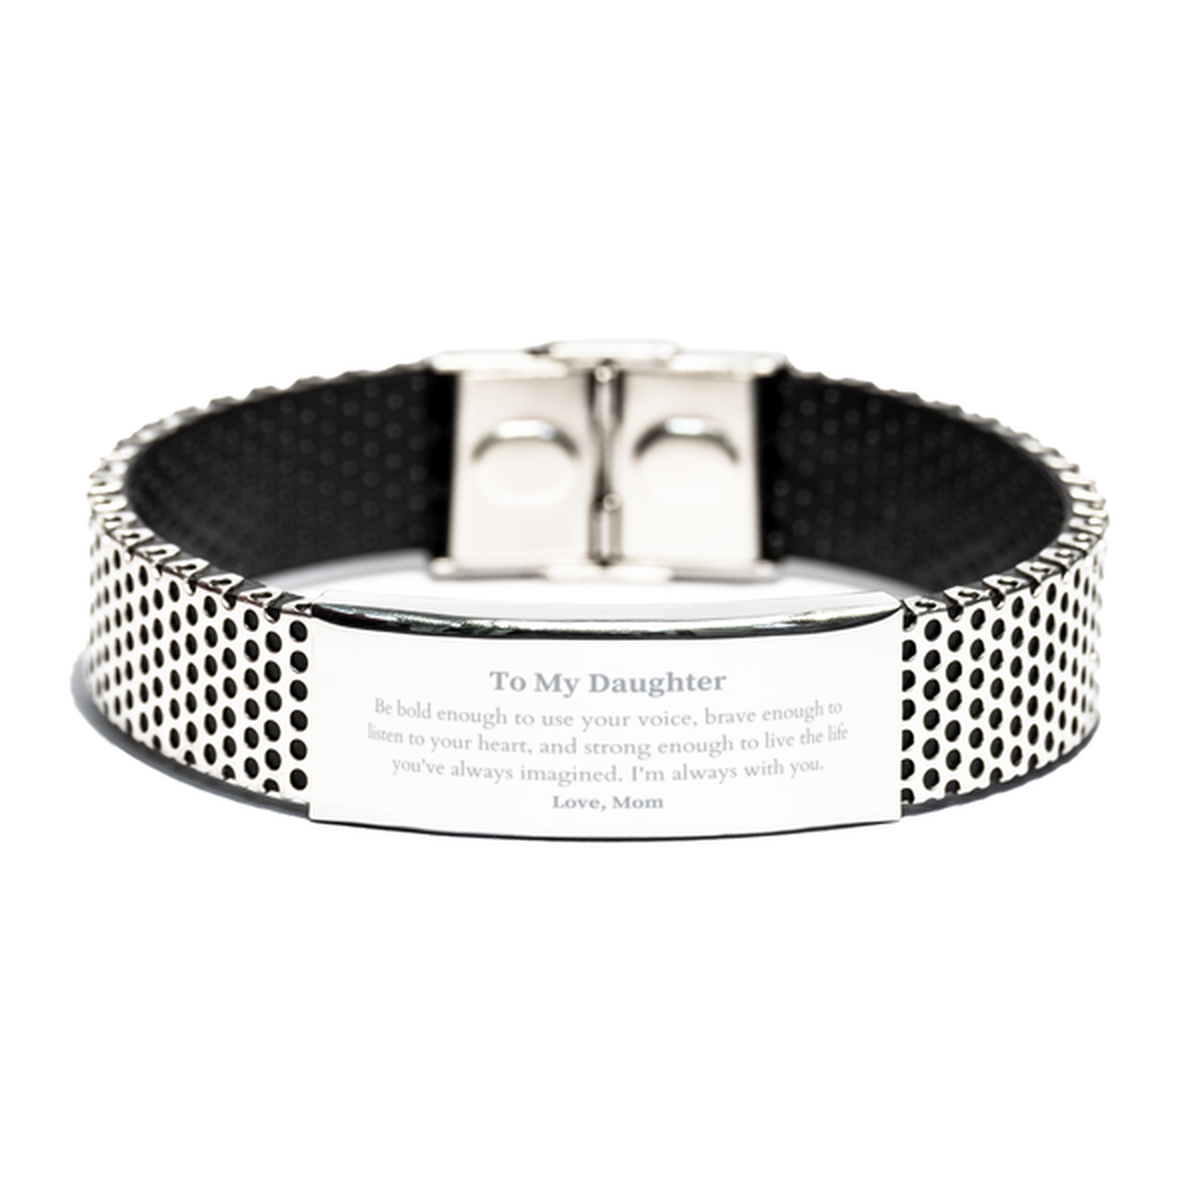 Keepsake Daughter Stainless Steel Bracelet Gift Idea Graduation Christmas Birthday Daughter from Mom, Daughter Be bold enough to use your voice, brave enough to listen to your heart. Love, Mom